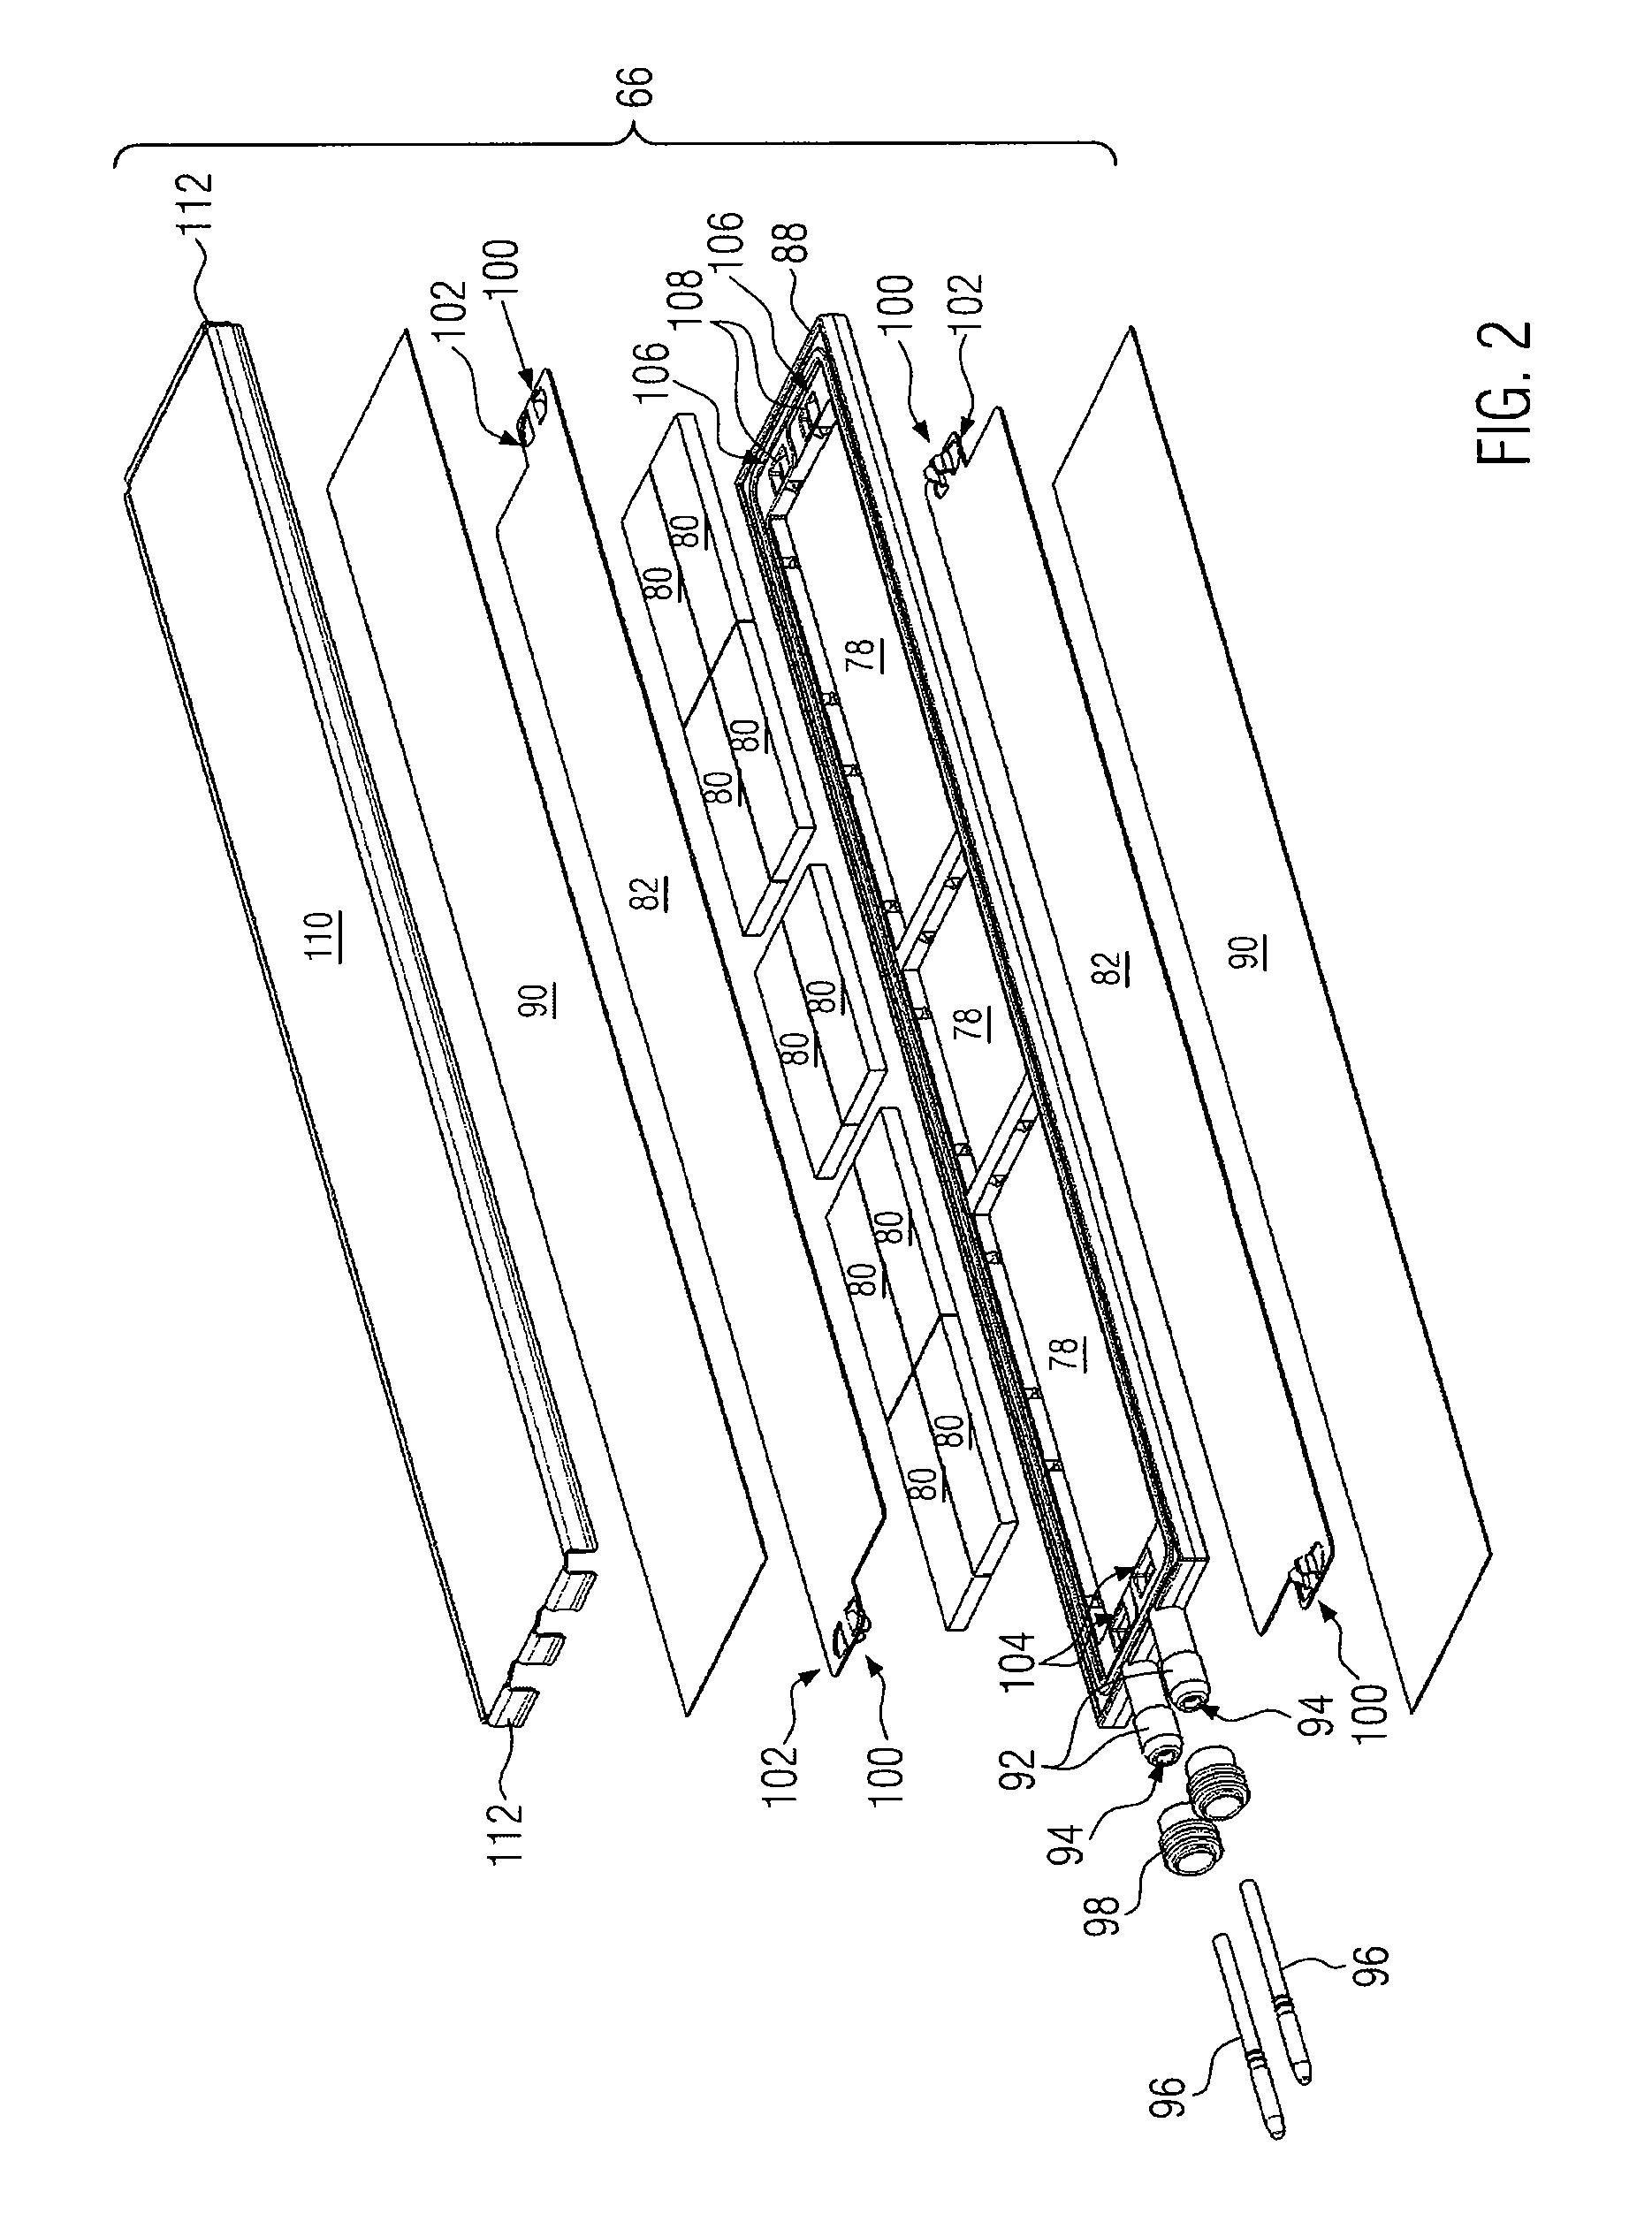 Electrical heating device, particularly for a motor vehicle